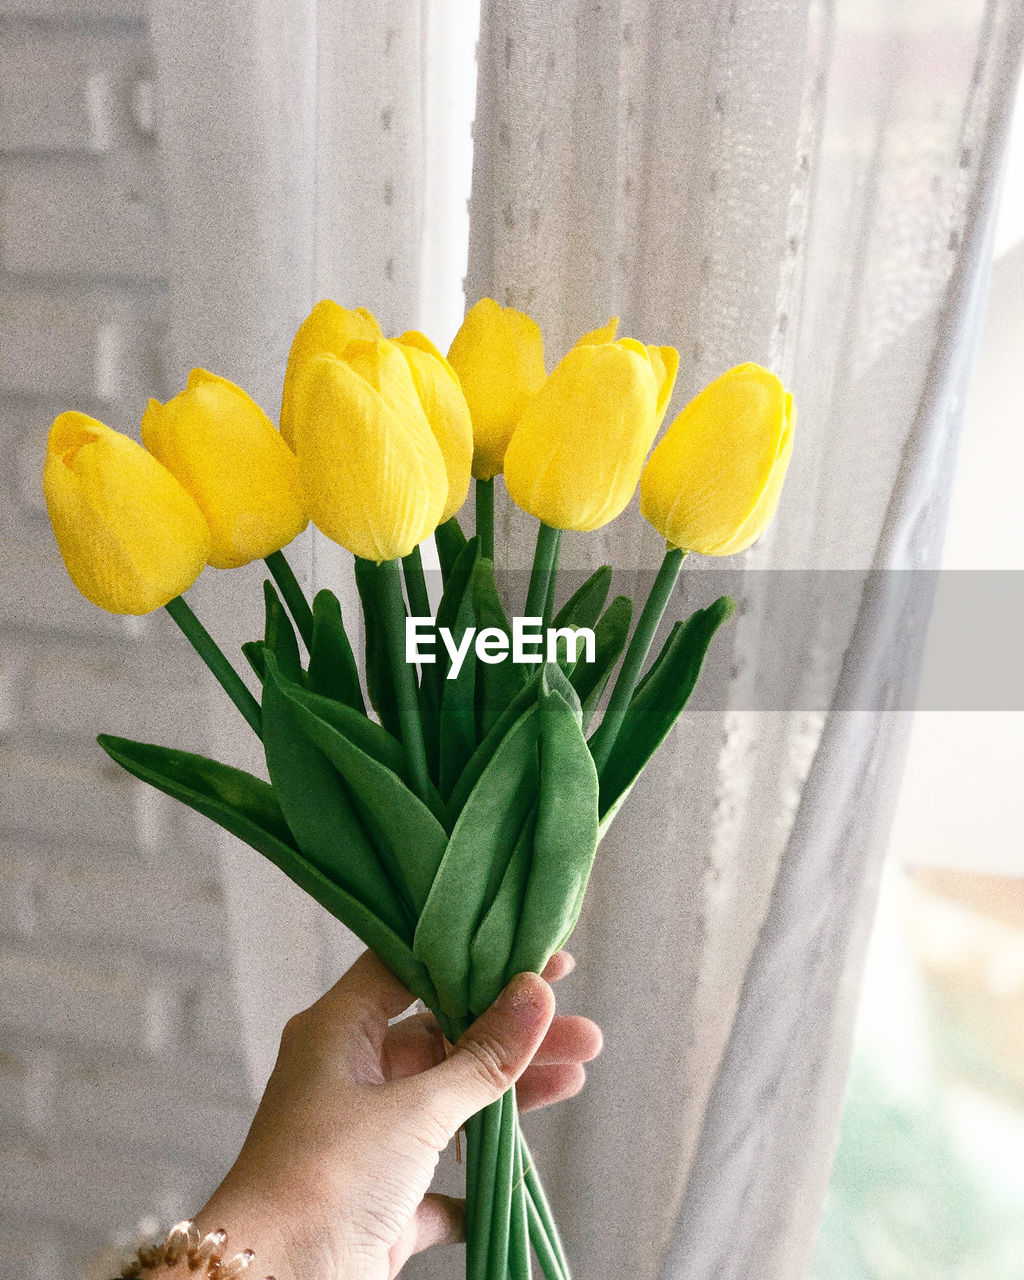 CLOSE-UP OF HAND HOLDING YELLOW TULIP FLOWERS